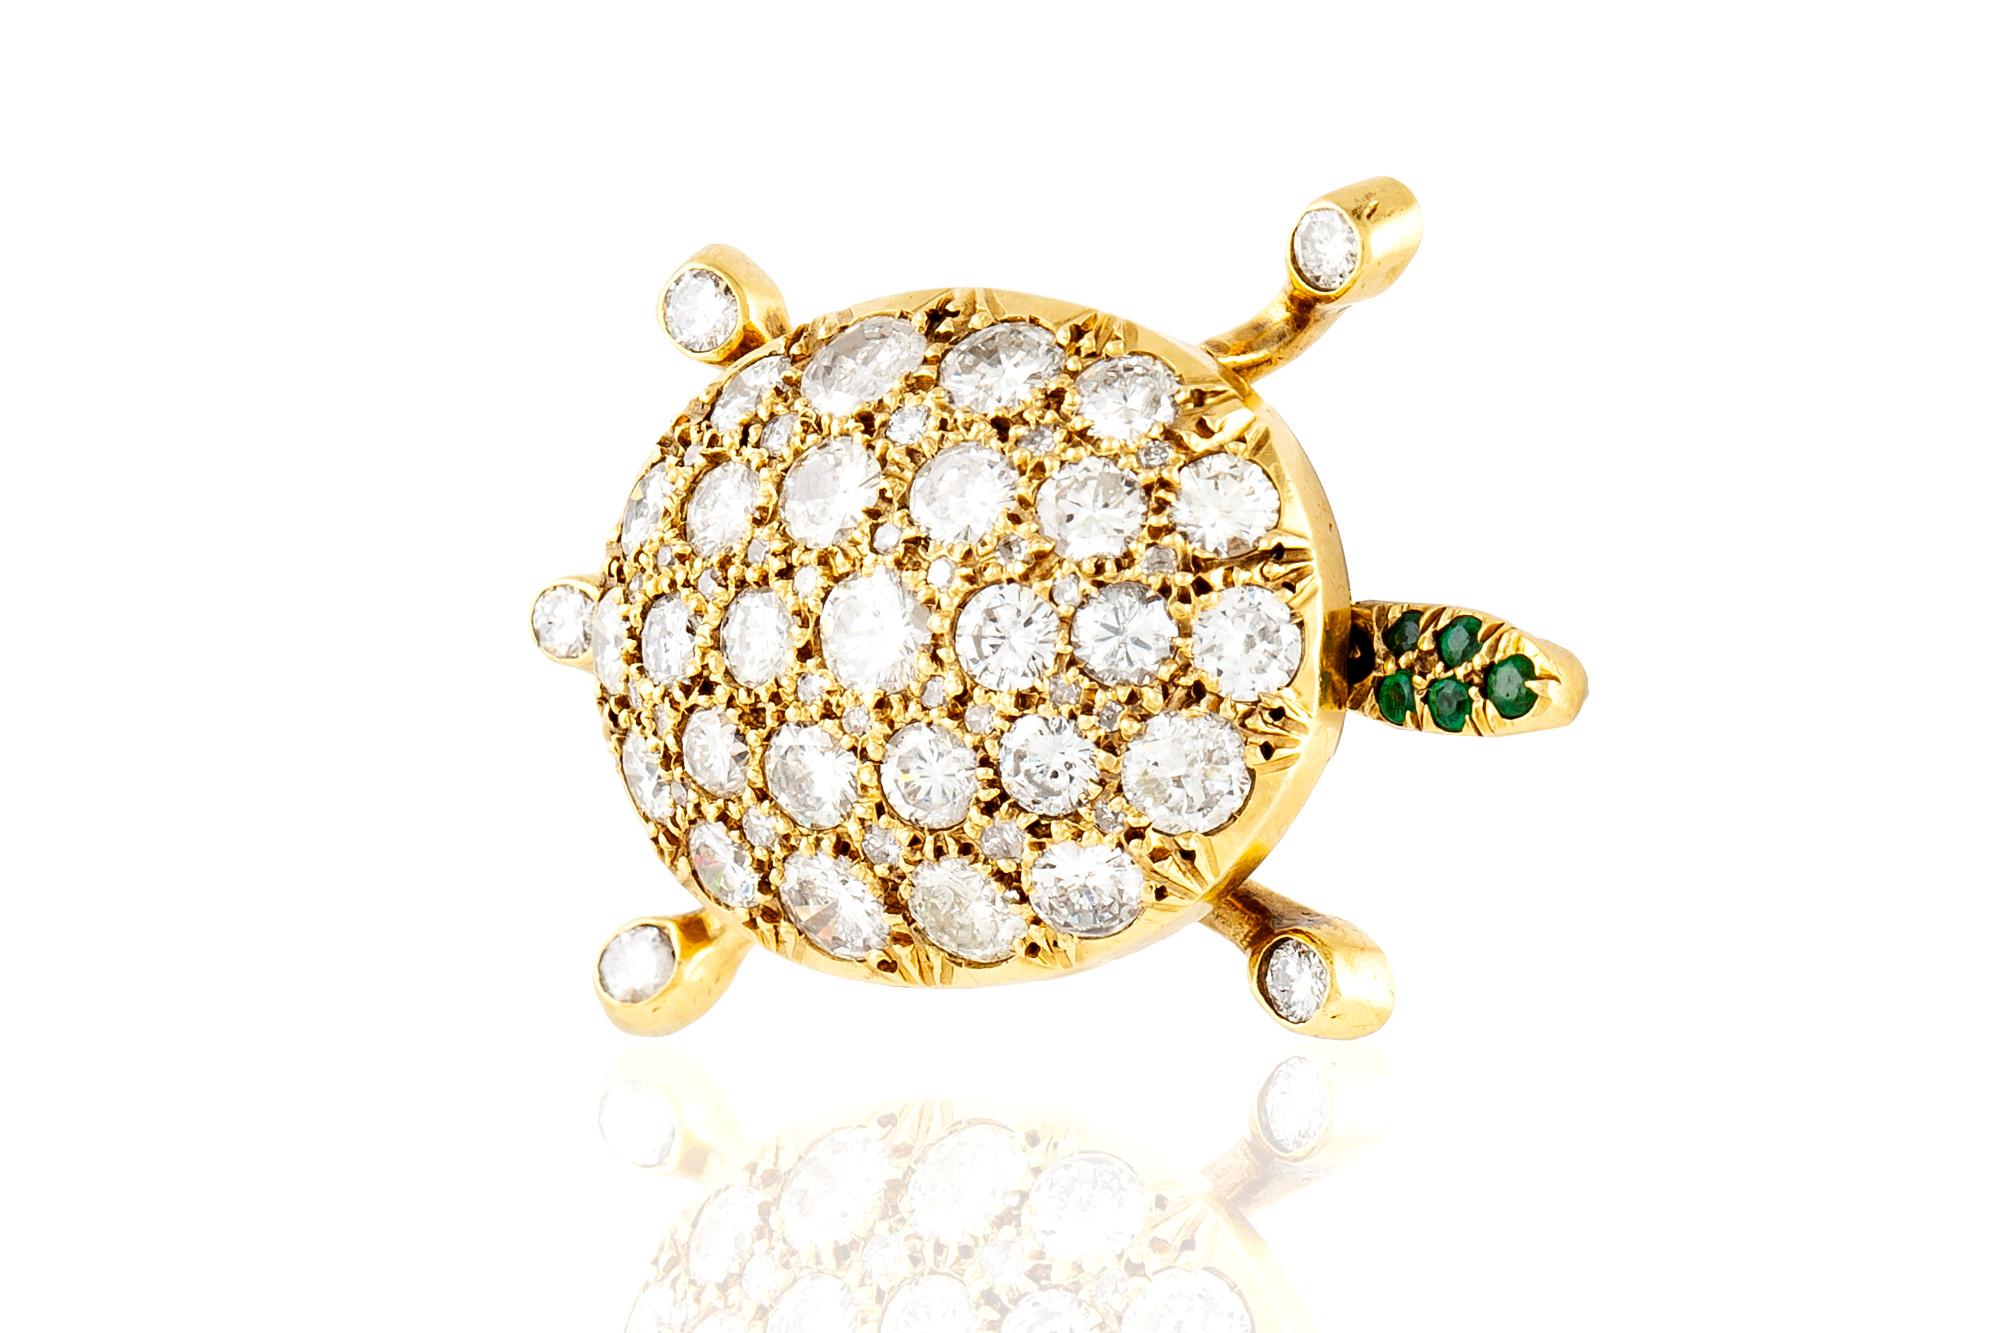 Turtle brooch. finely crafted in 18 k yellow gold, with brilliant cut diamonds, weighing a total of approximately 9.00 carat and round cut emeralds on the head.